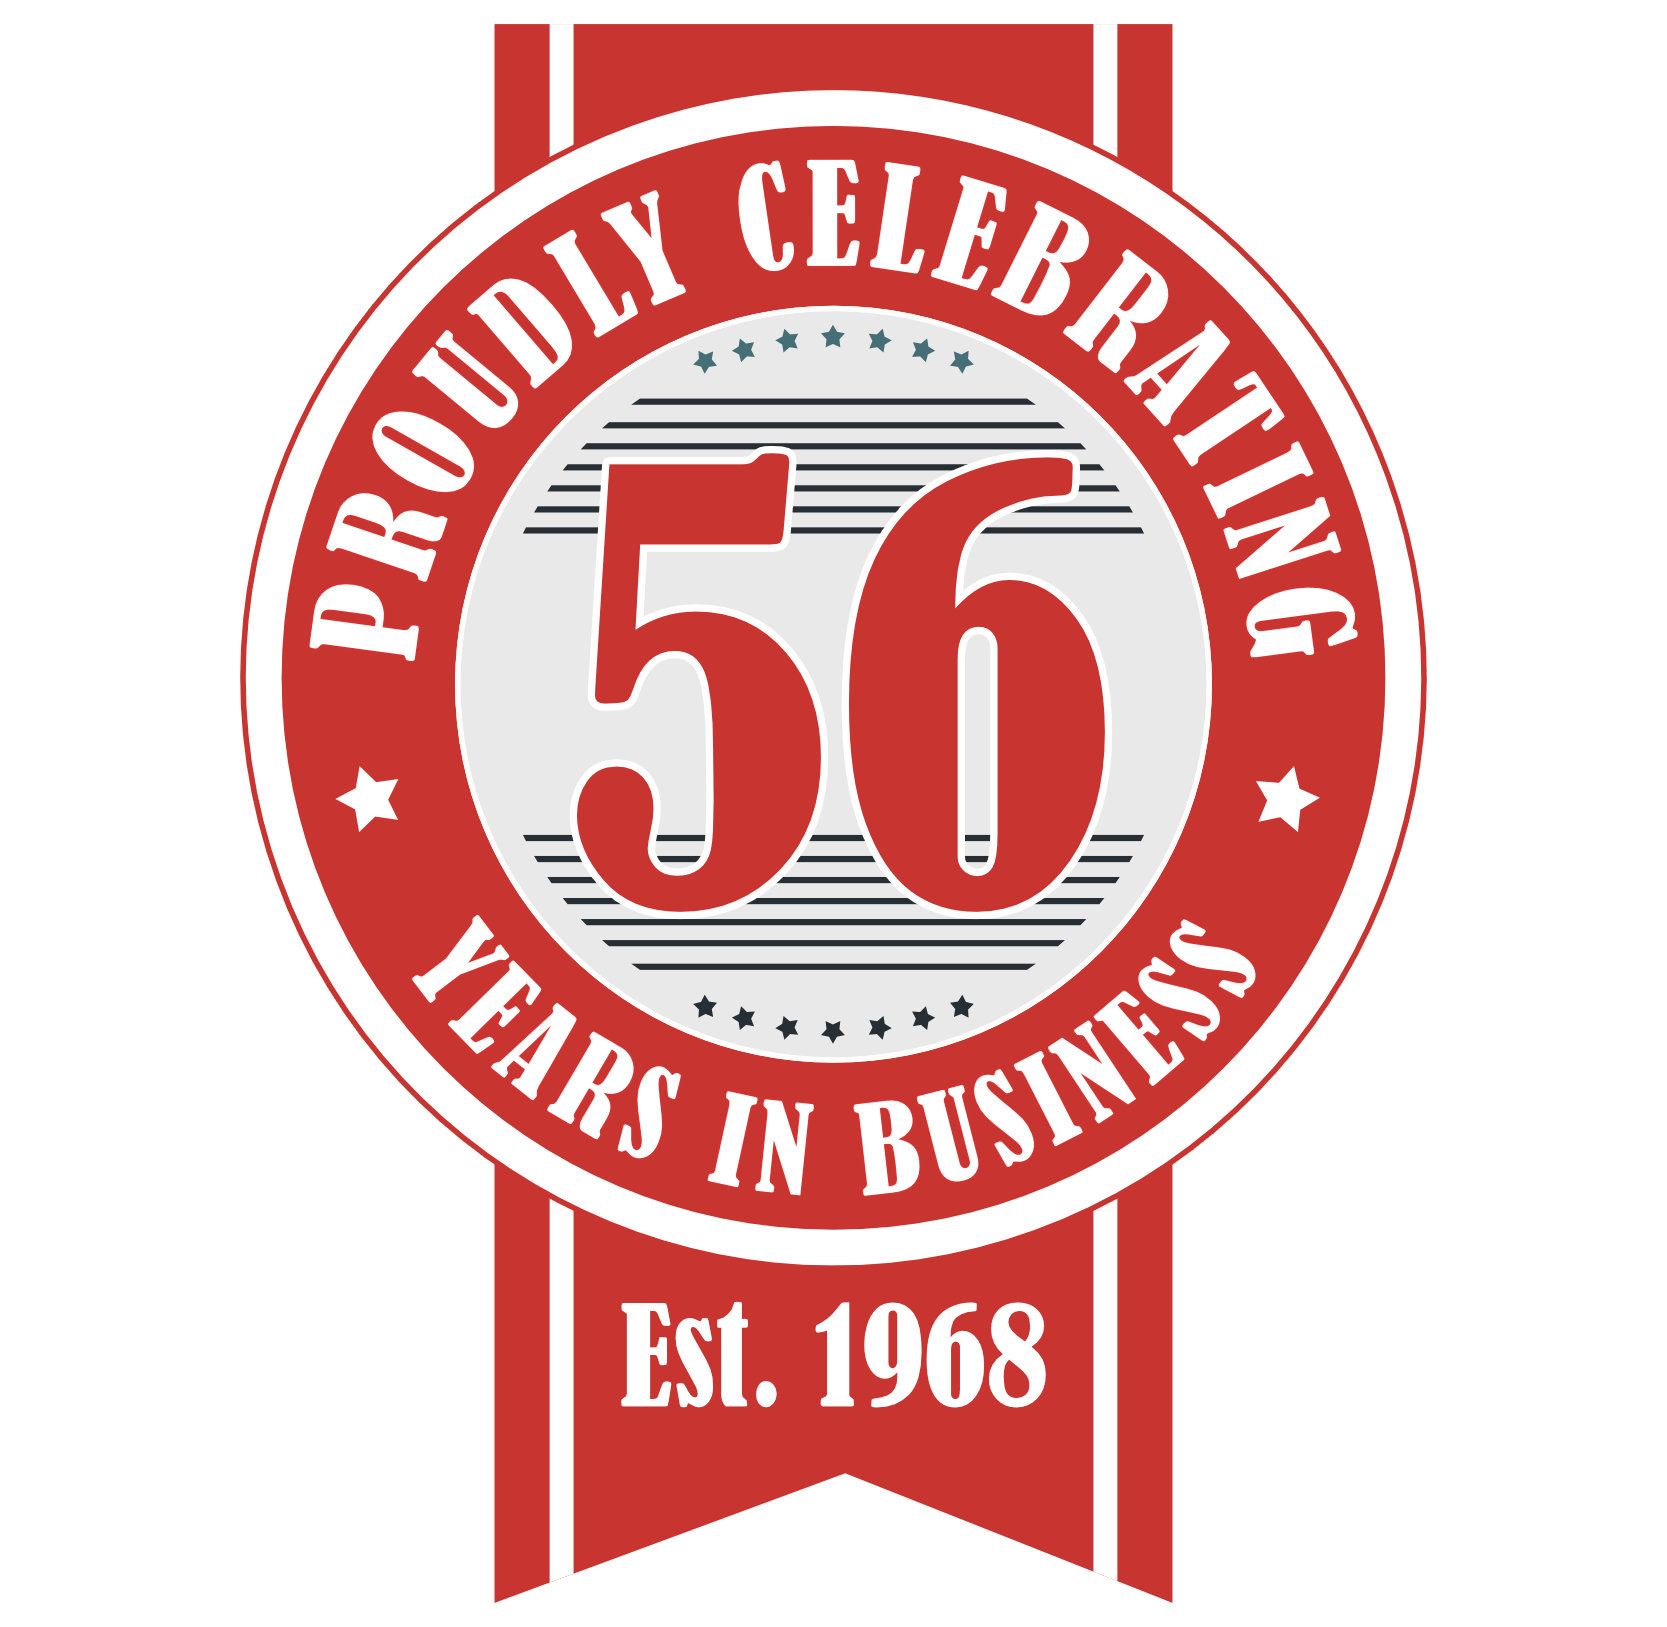 Celebrating 53 years of service and success